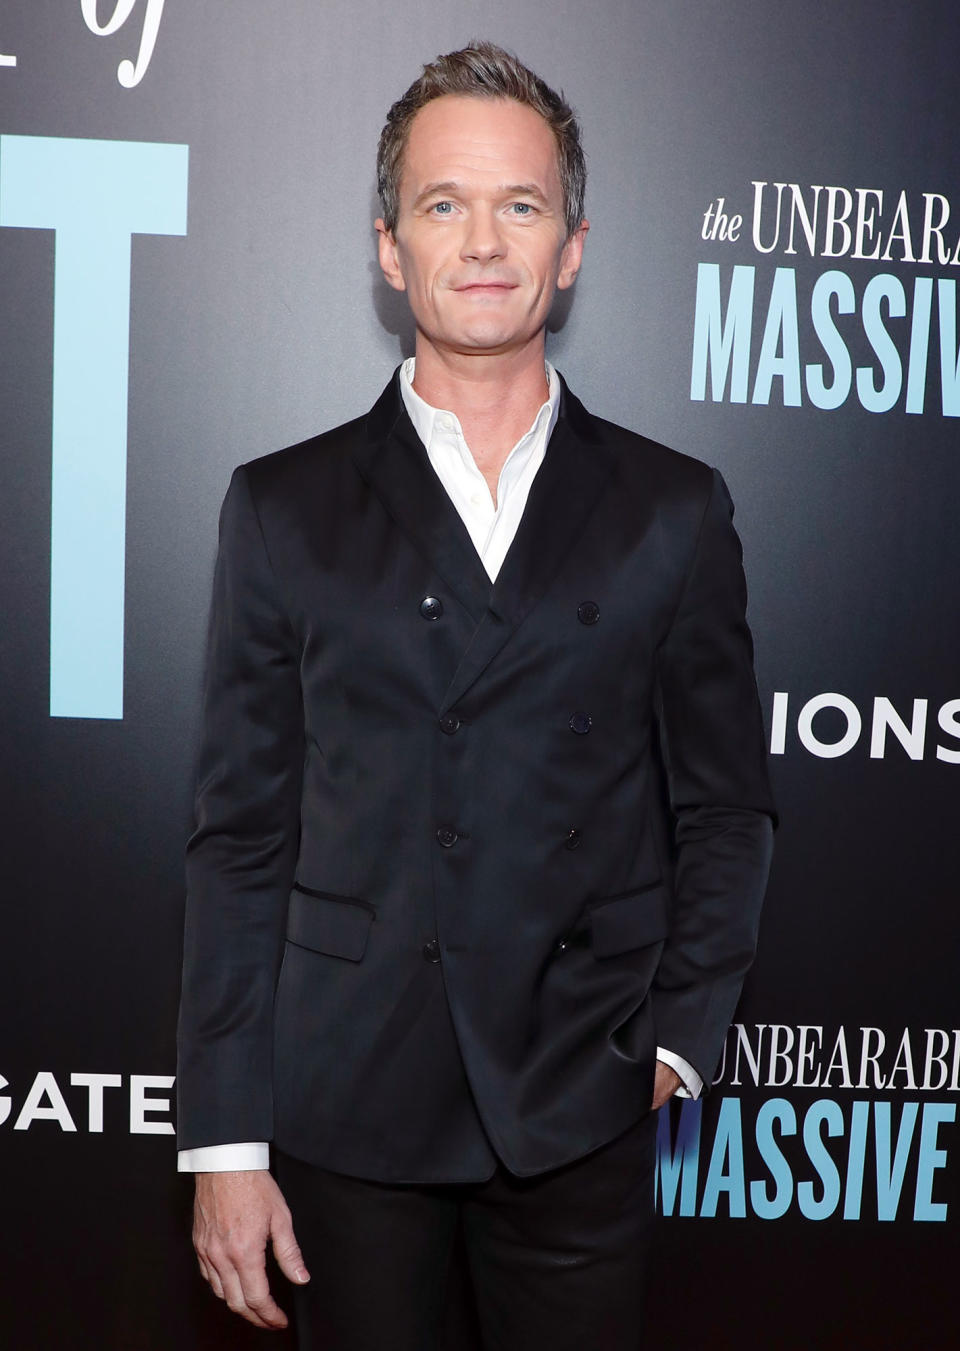 Who Is Neil Patrick Harris Playing?